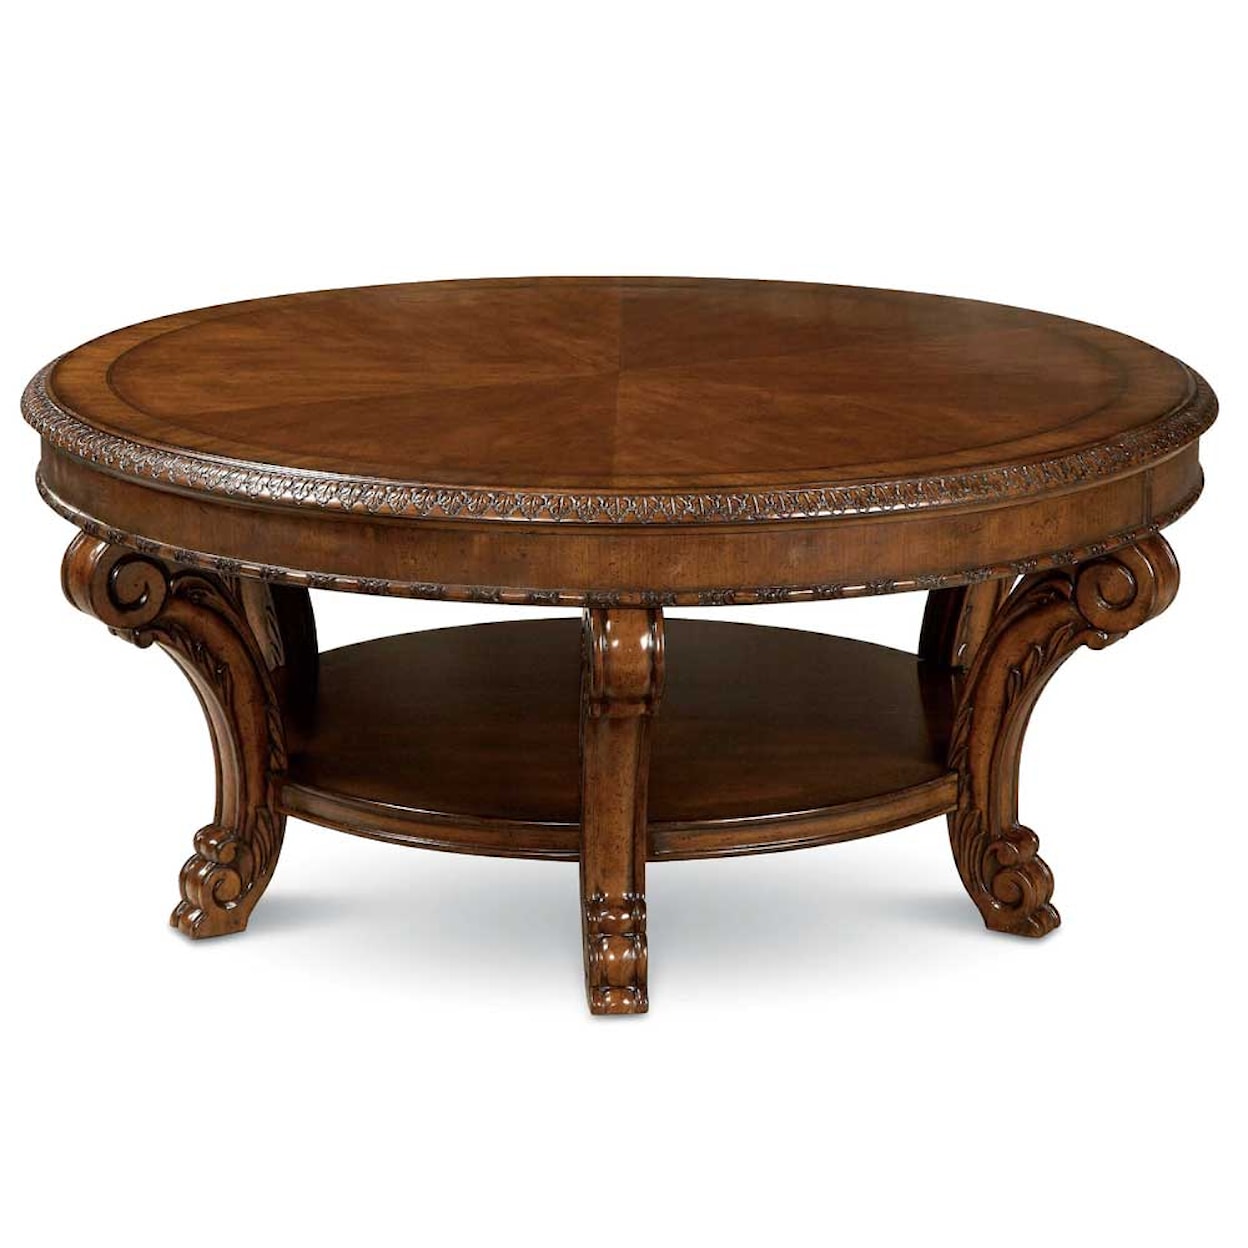 A.R.T. Furniture Inc Old World Round Cocktail Table